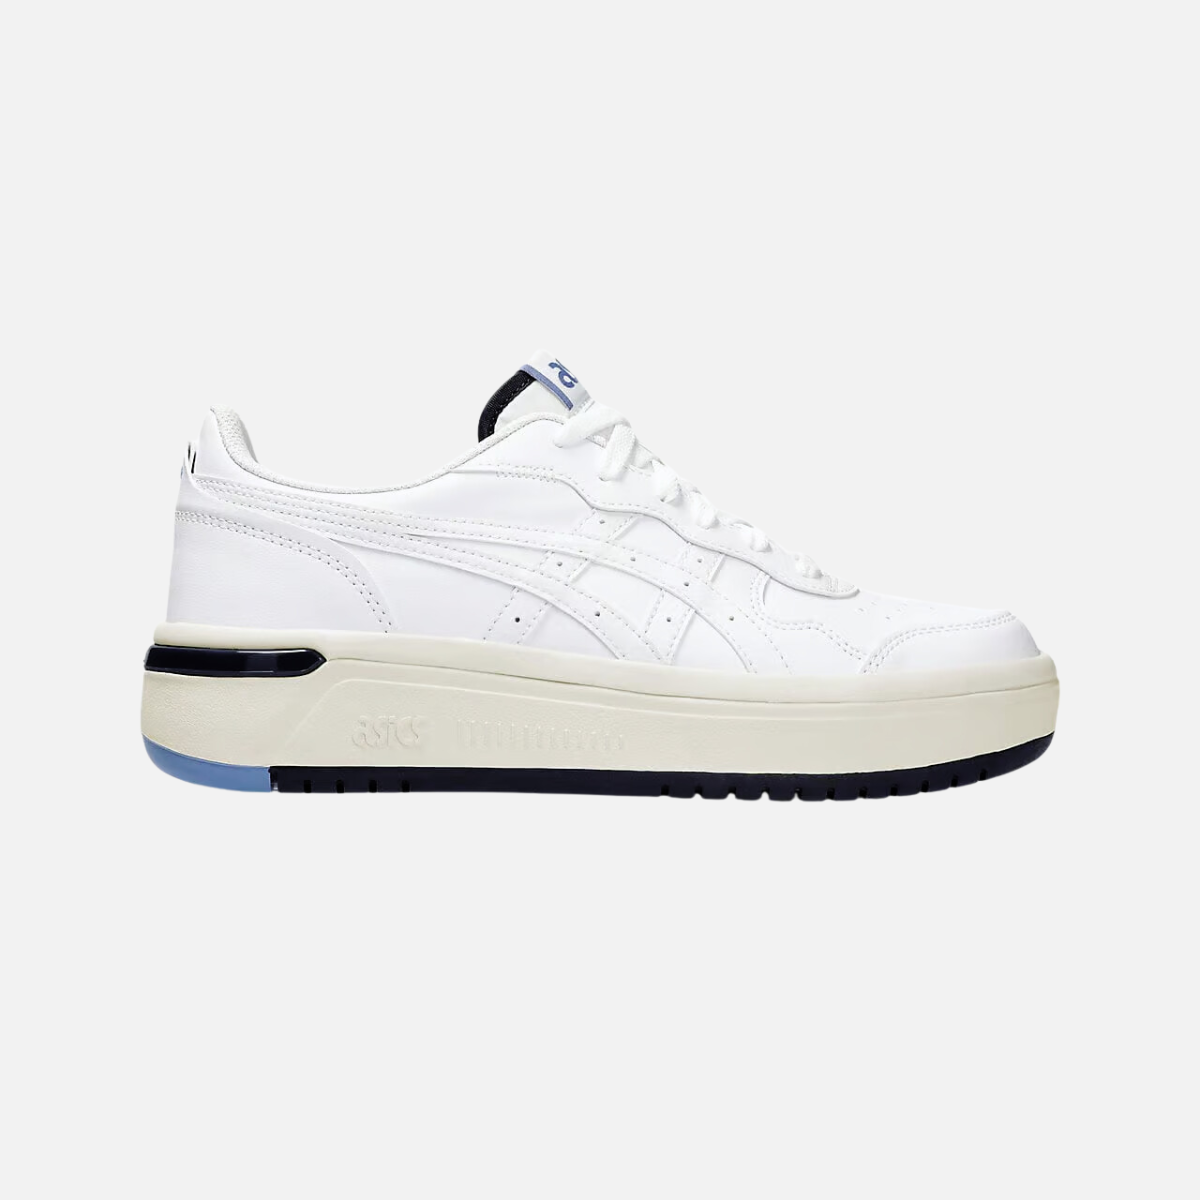 Asics Japan s Stack Men's Lifestyle Shoes -WHITE/MIDNIGHT